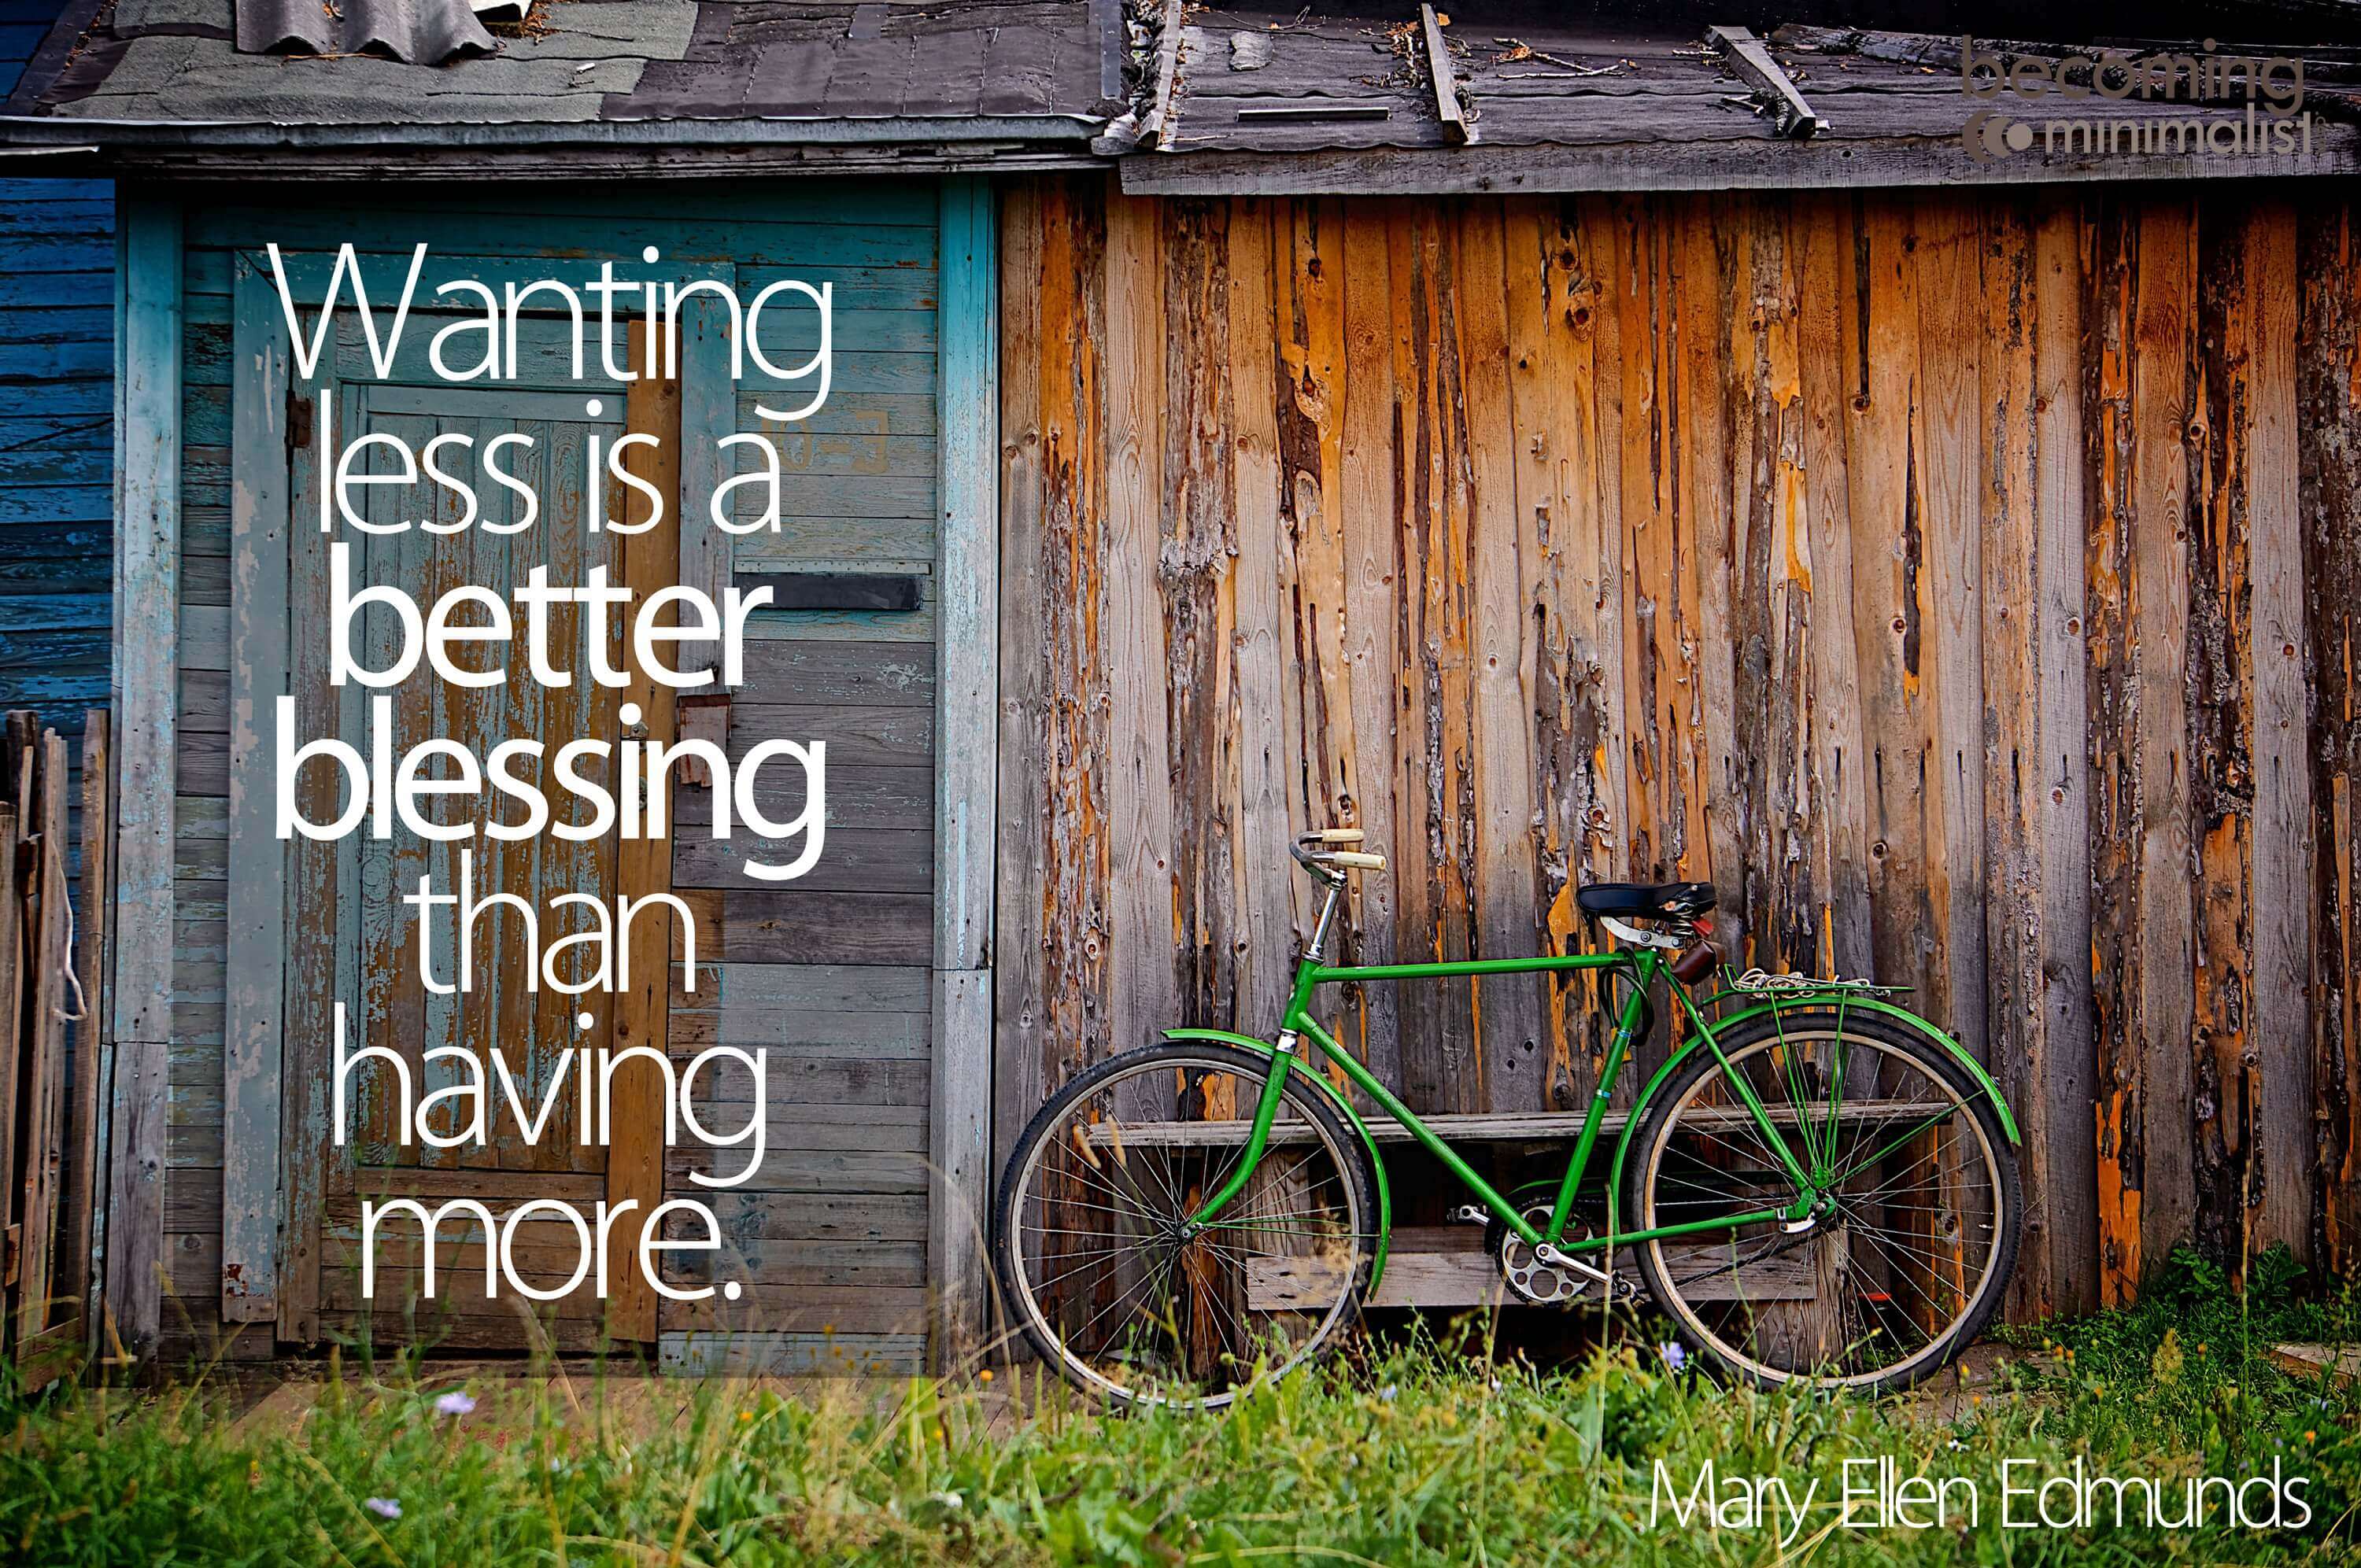 wanting-less-is-a-better-blessing__1398806887_70.78.46.203